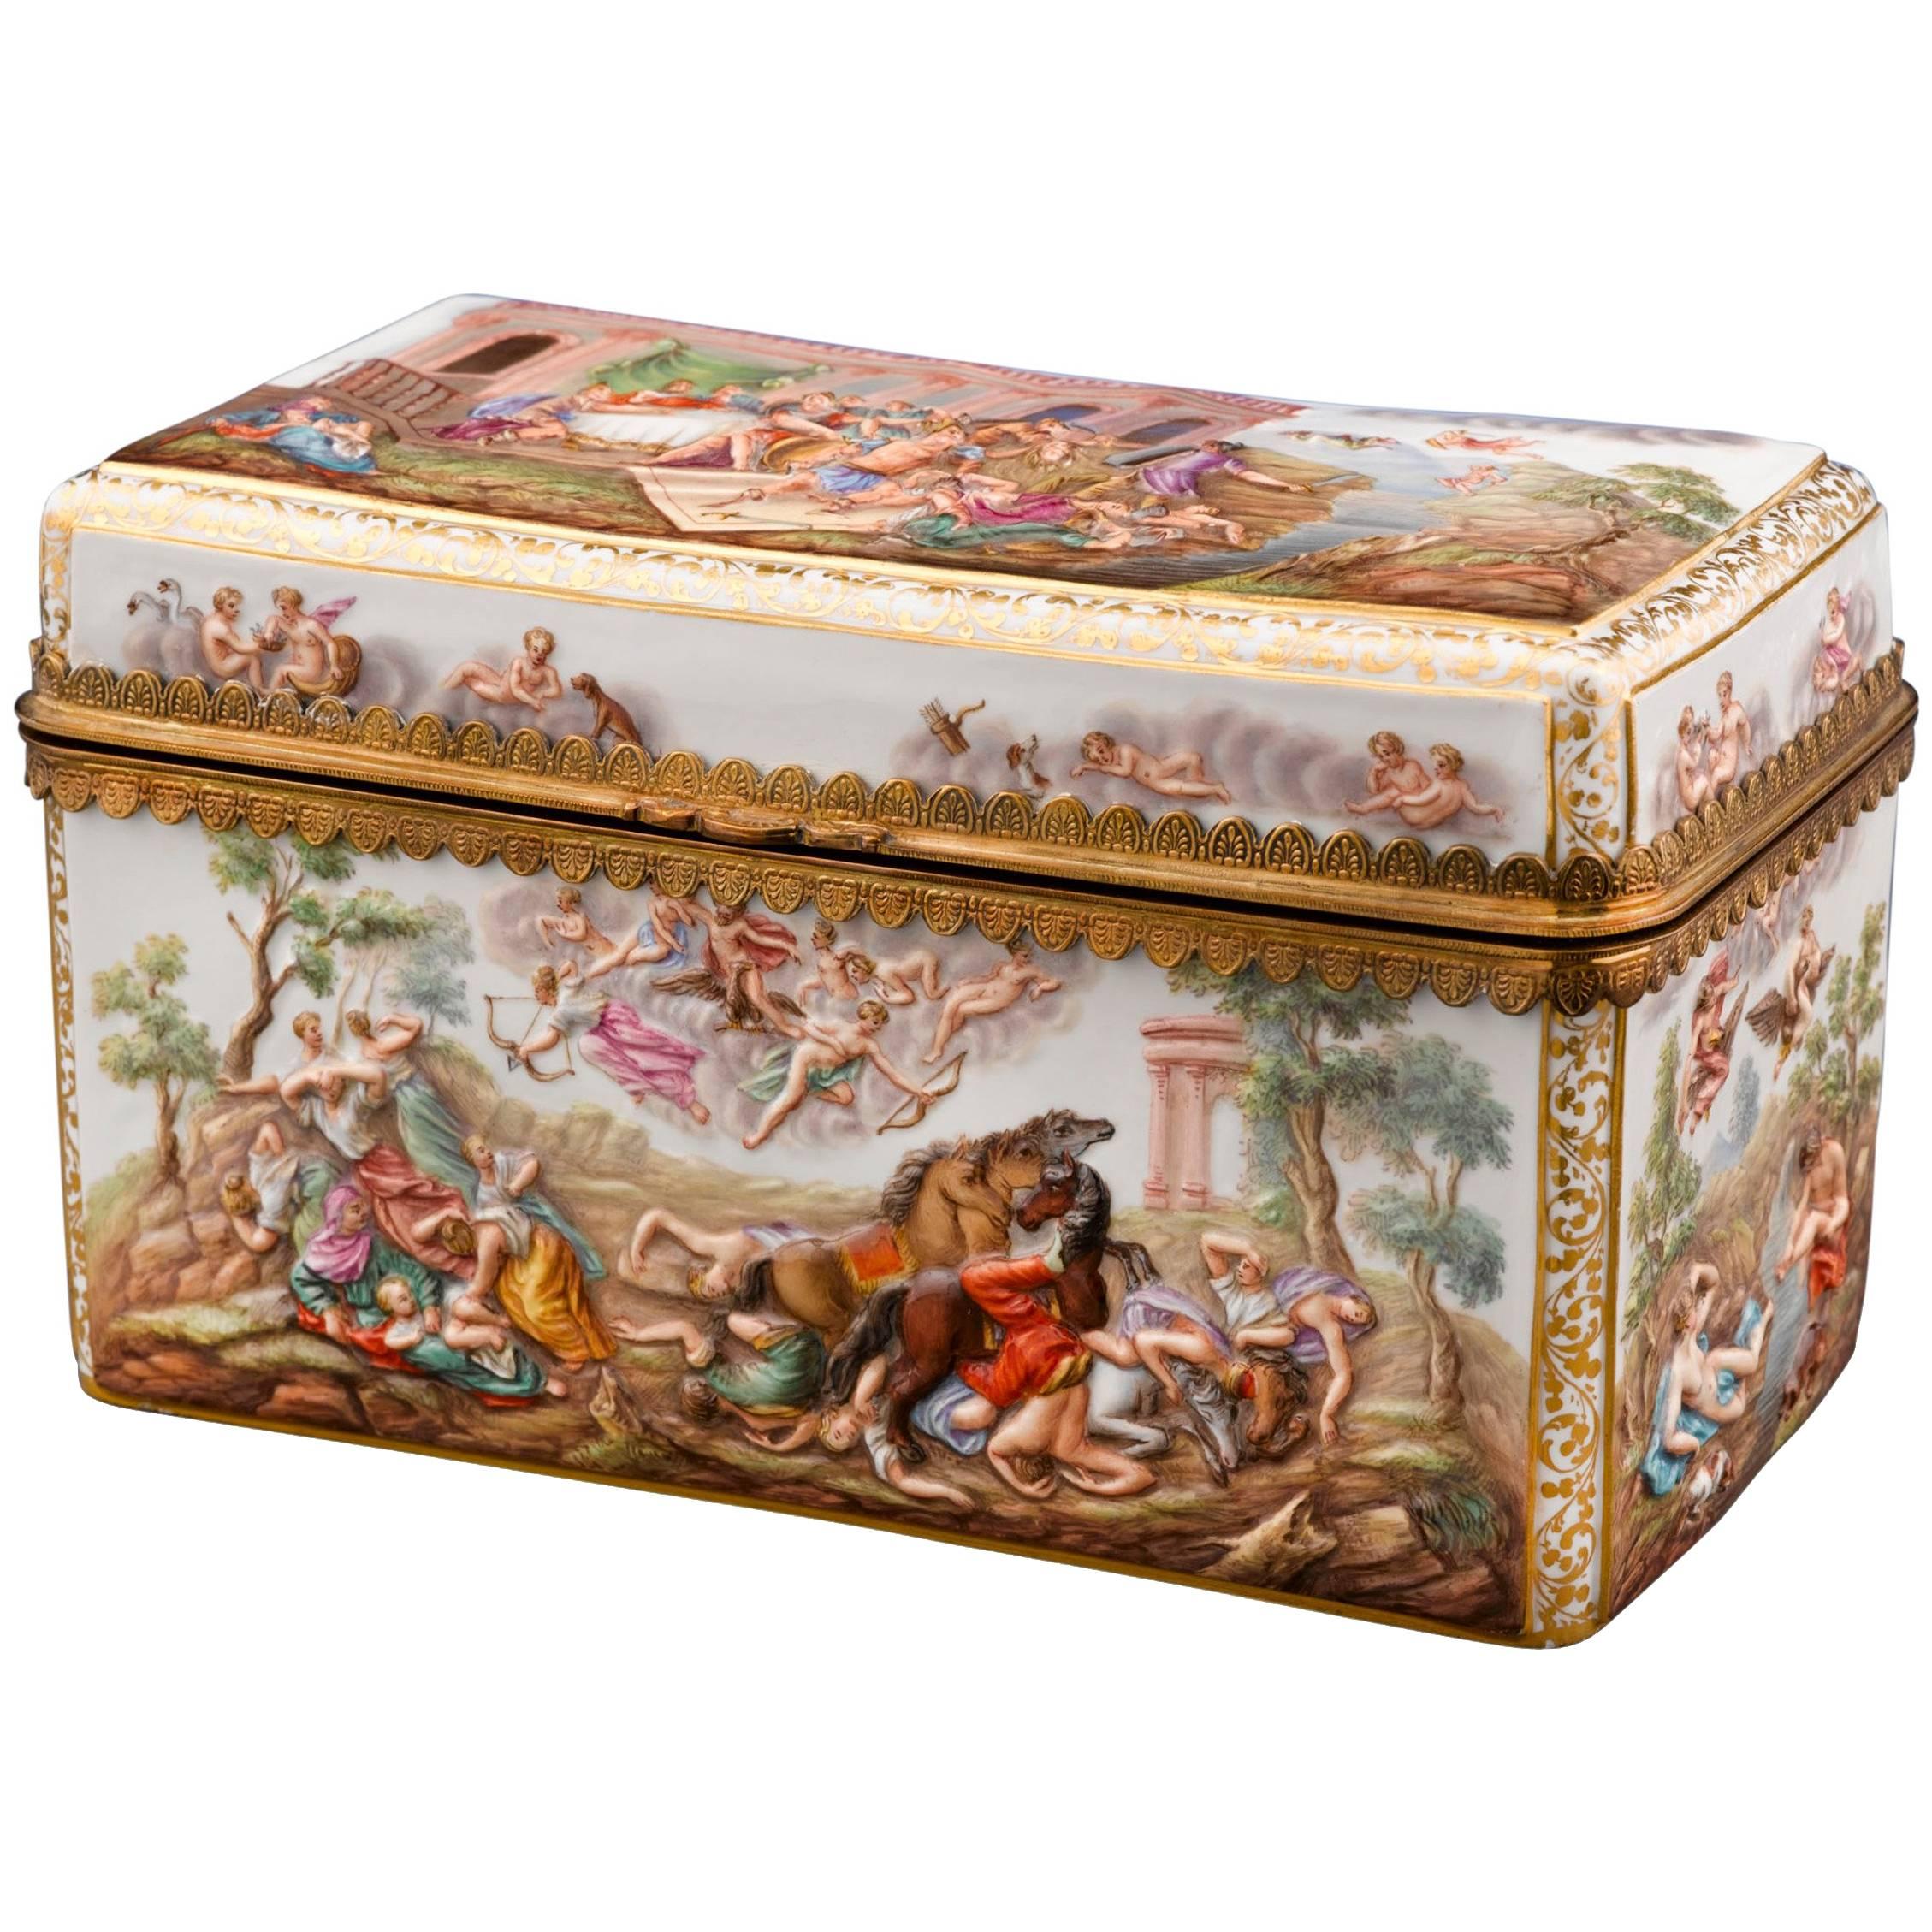 19th Century Porcelain Box with Fighting Scene by Meissen